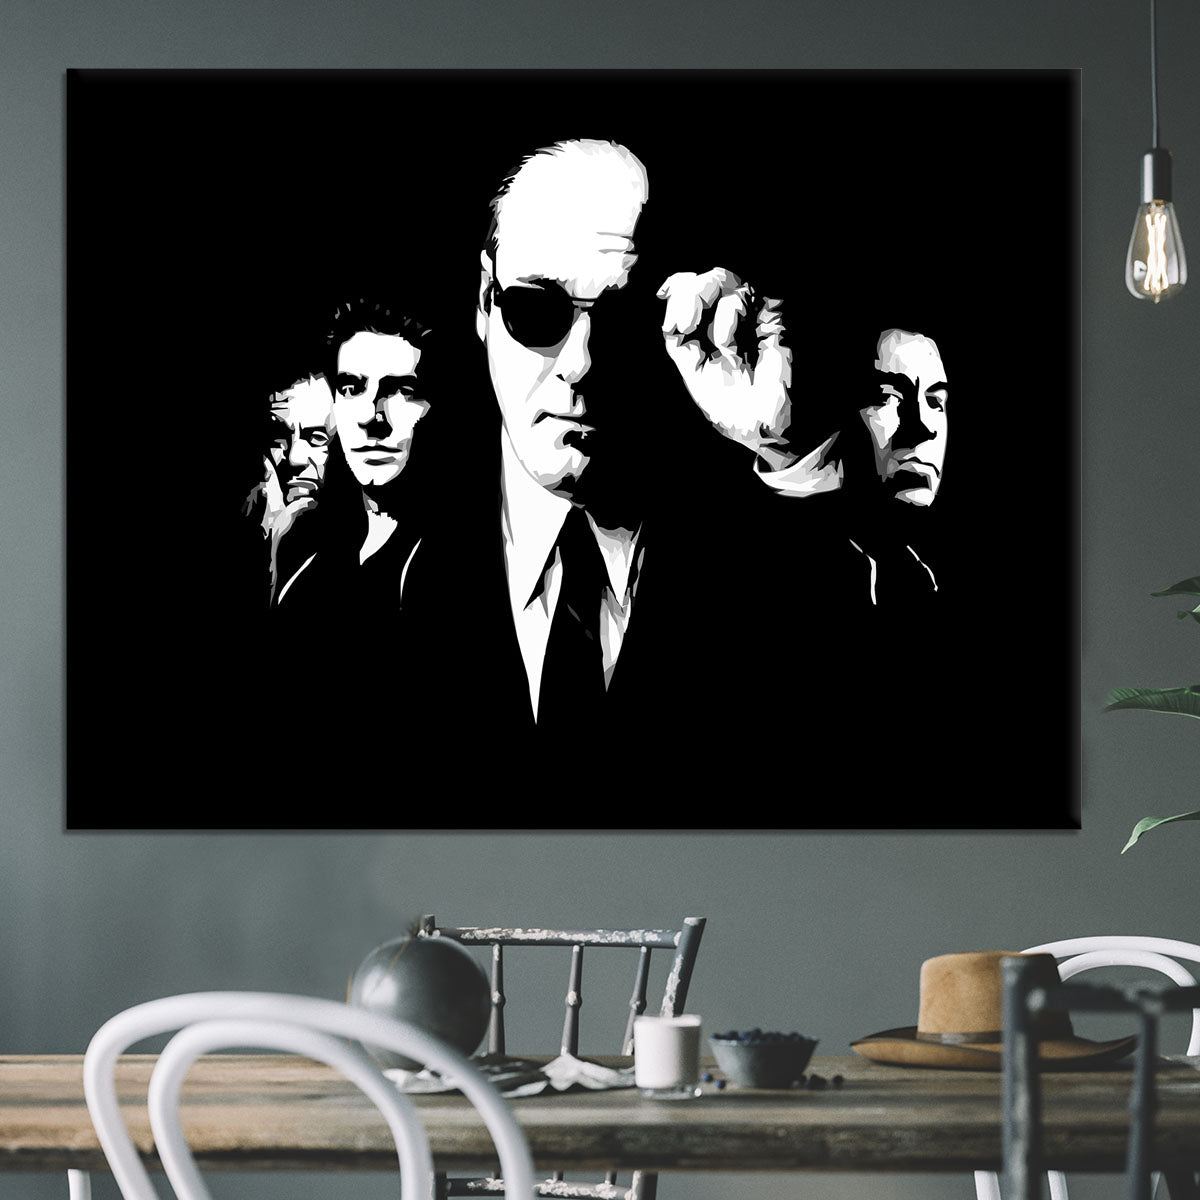 The Sopranos "Like Brothers" Canvas Print or Poster